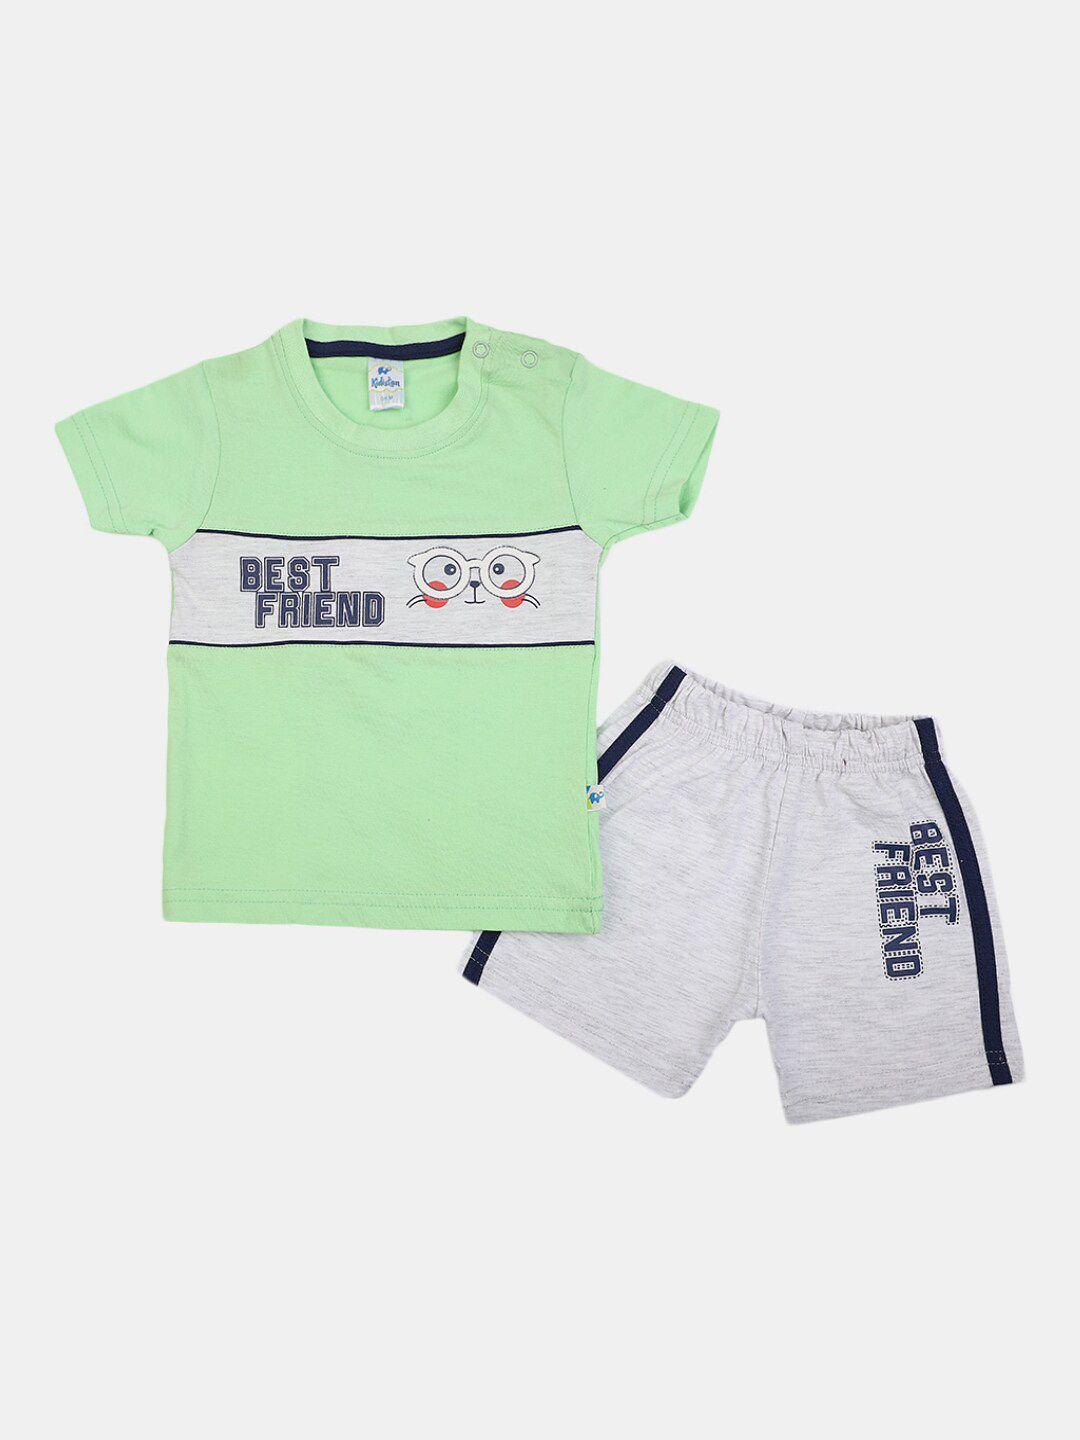 v-mart infant kids printed pure cotton shirt with shorts